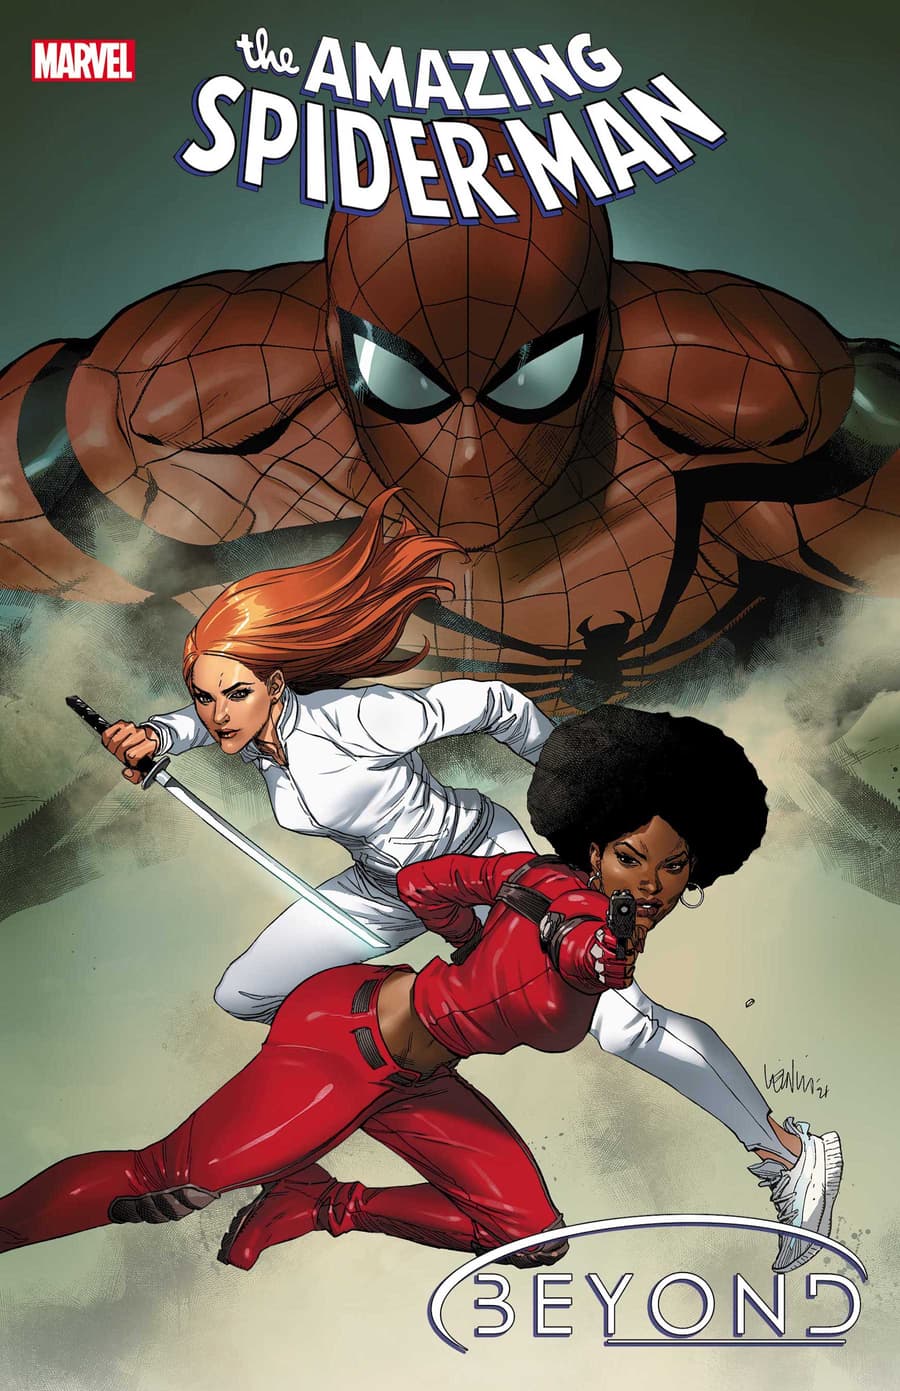 AMAZING SPIDER-MAN #78.BEY cover by Leinil Francis Yu